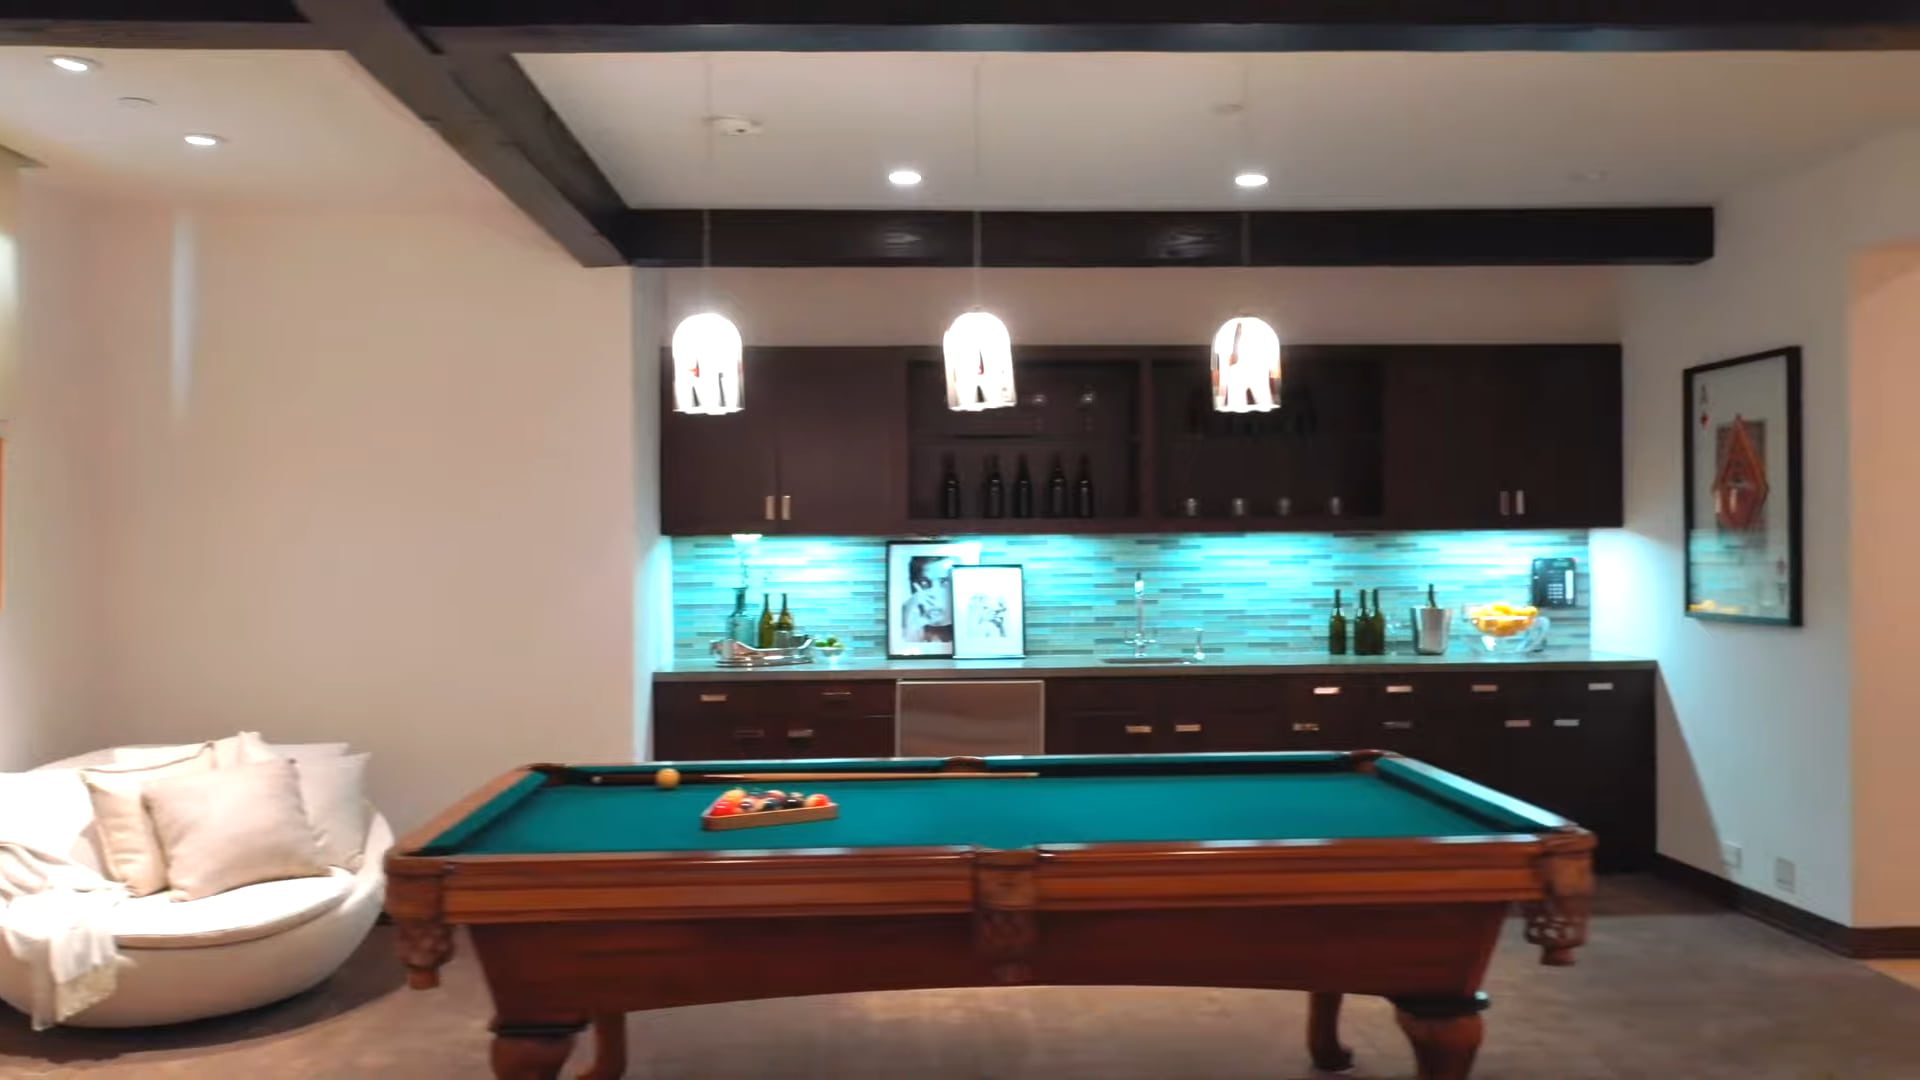 Ethan Klein’s game room